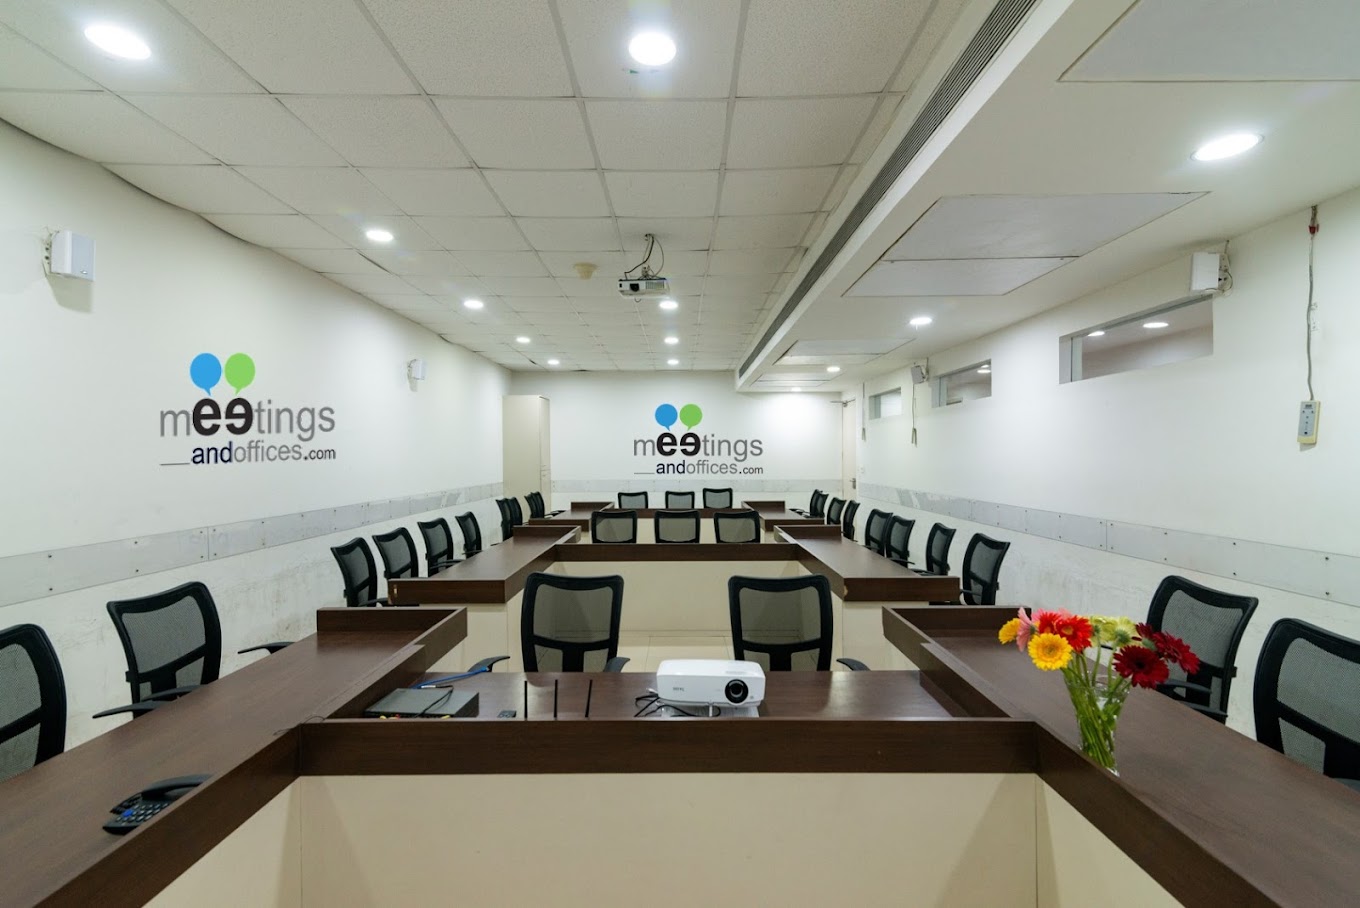 Meetings and Offices – Delhi